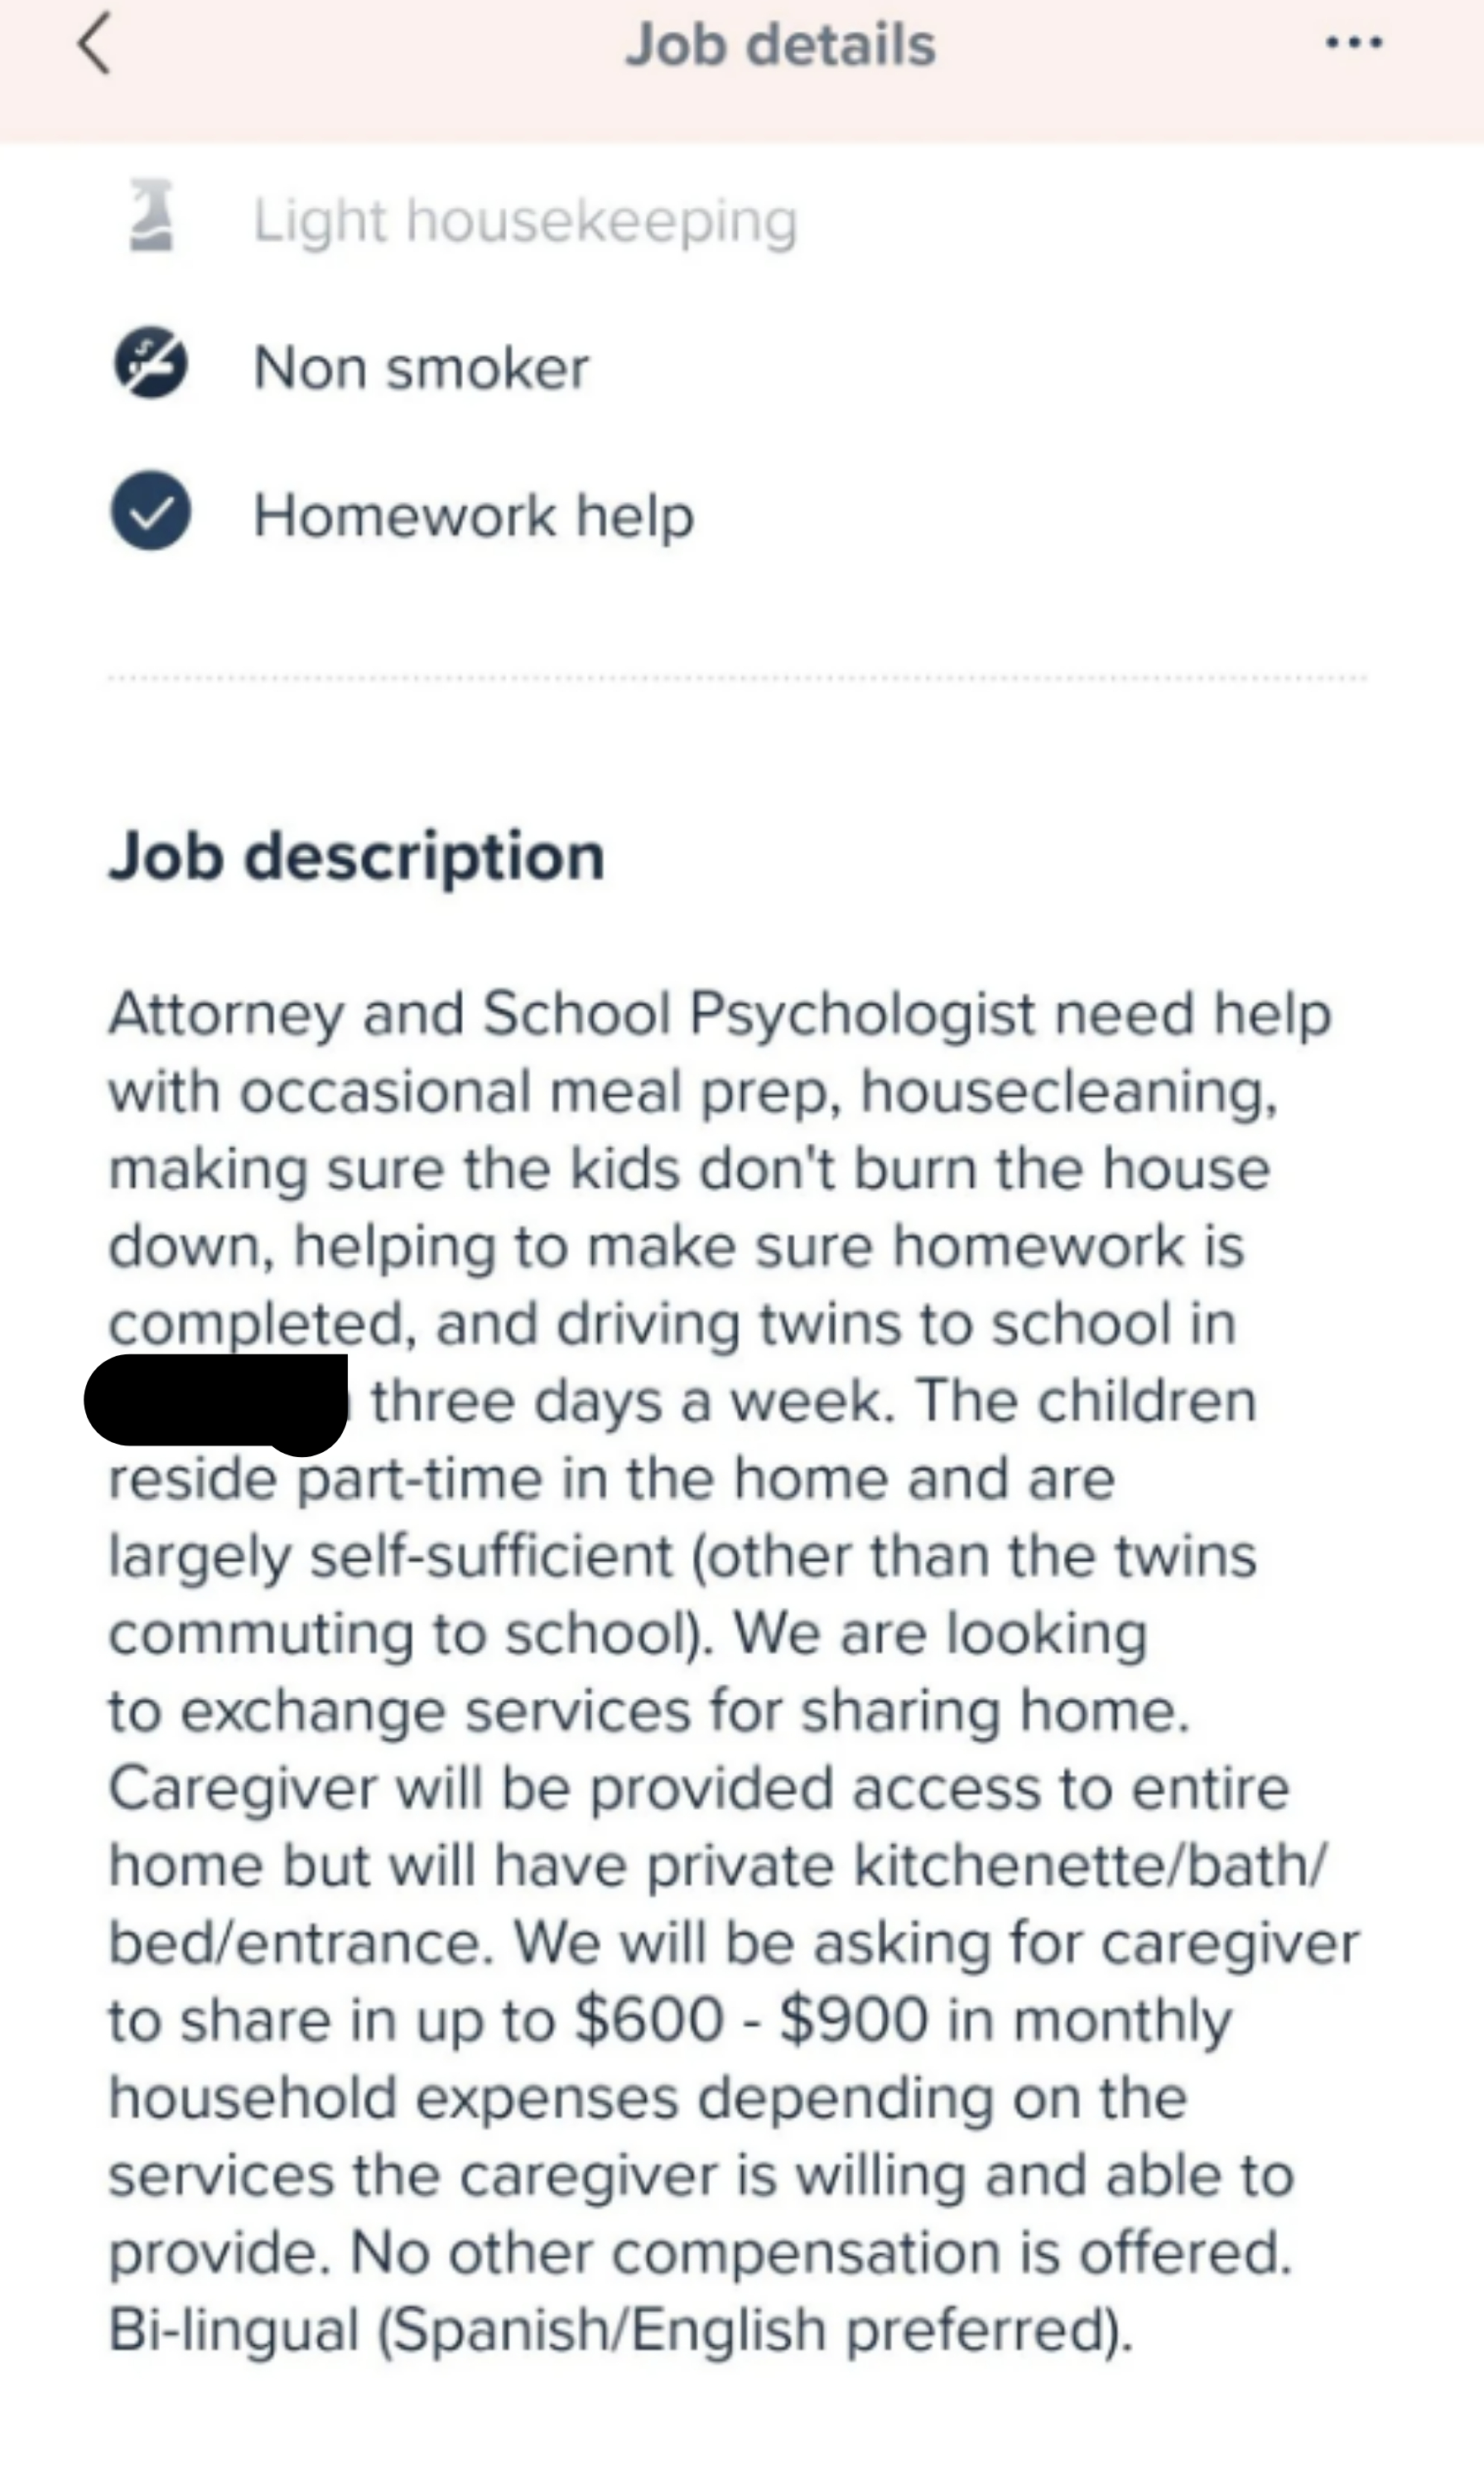 A job post asks for someone to live in their home, help with meal prep, house cleaning, and driving kids to school, and asks them to share in household expenses with no compensation